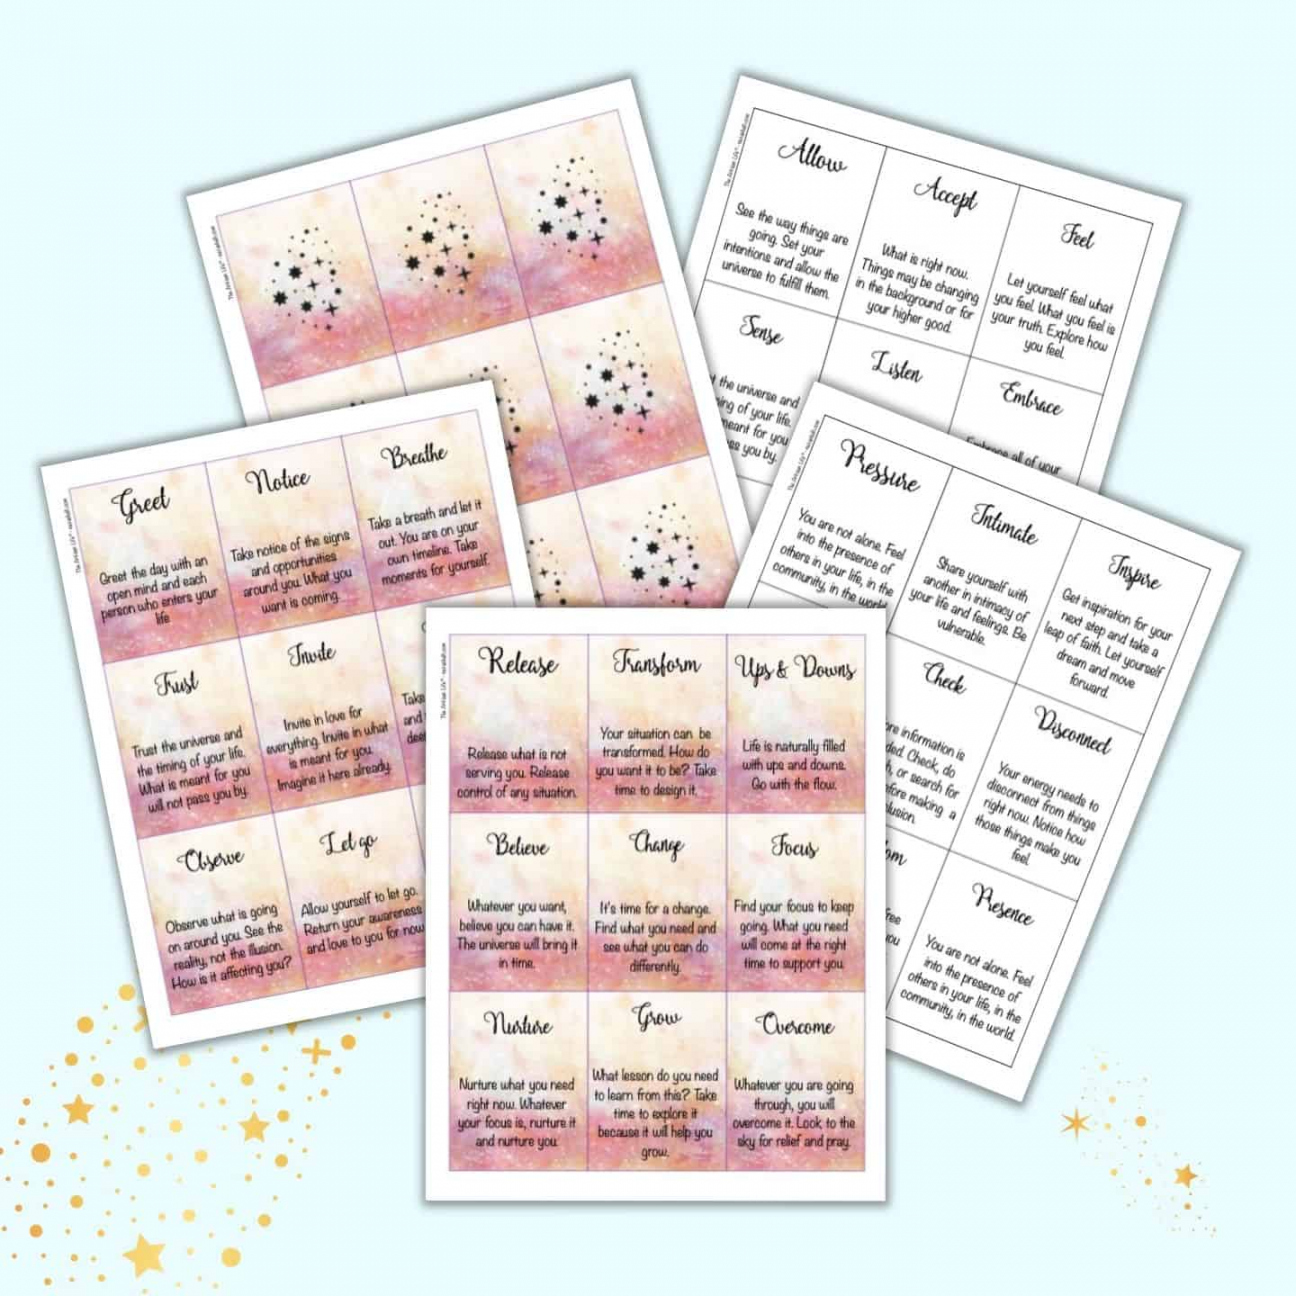 Free Printable Word of the day Oracle Cards - The Artisan Life - FREE Printables - Free Printable Oracle Cards